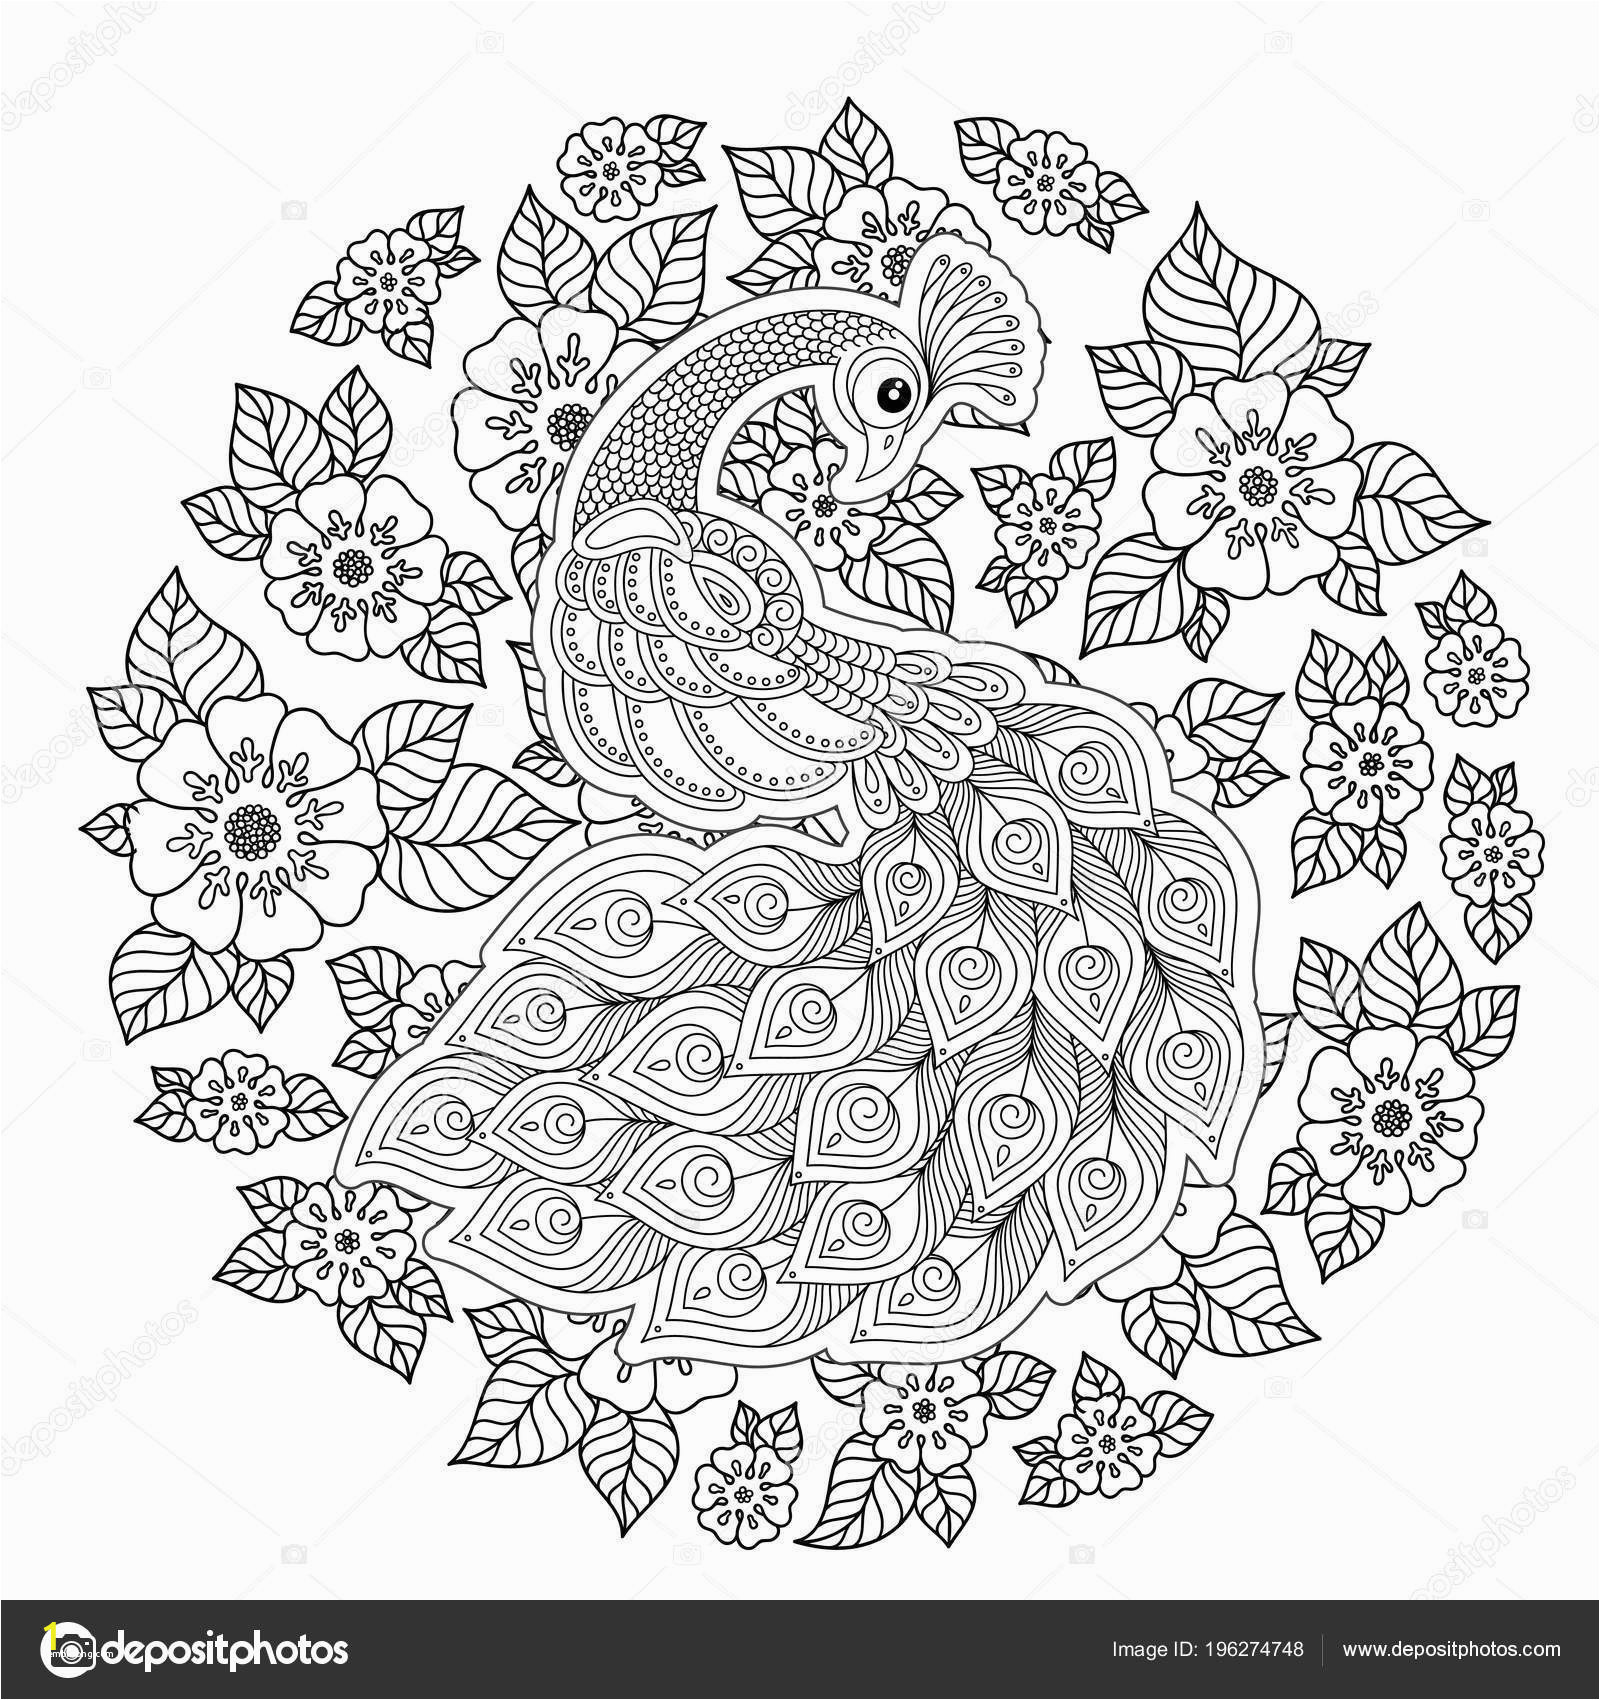 pattern coloring books for adults best of peacock adult antistress coloring page black white hand of pattern coloring books for adults